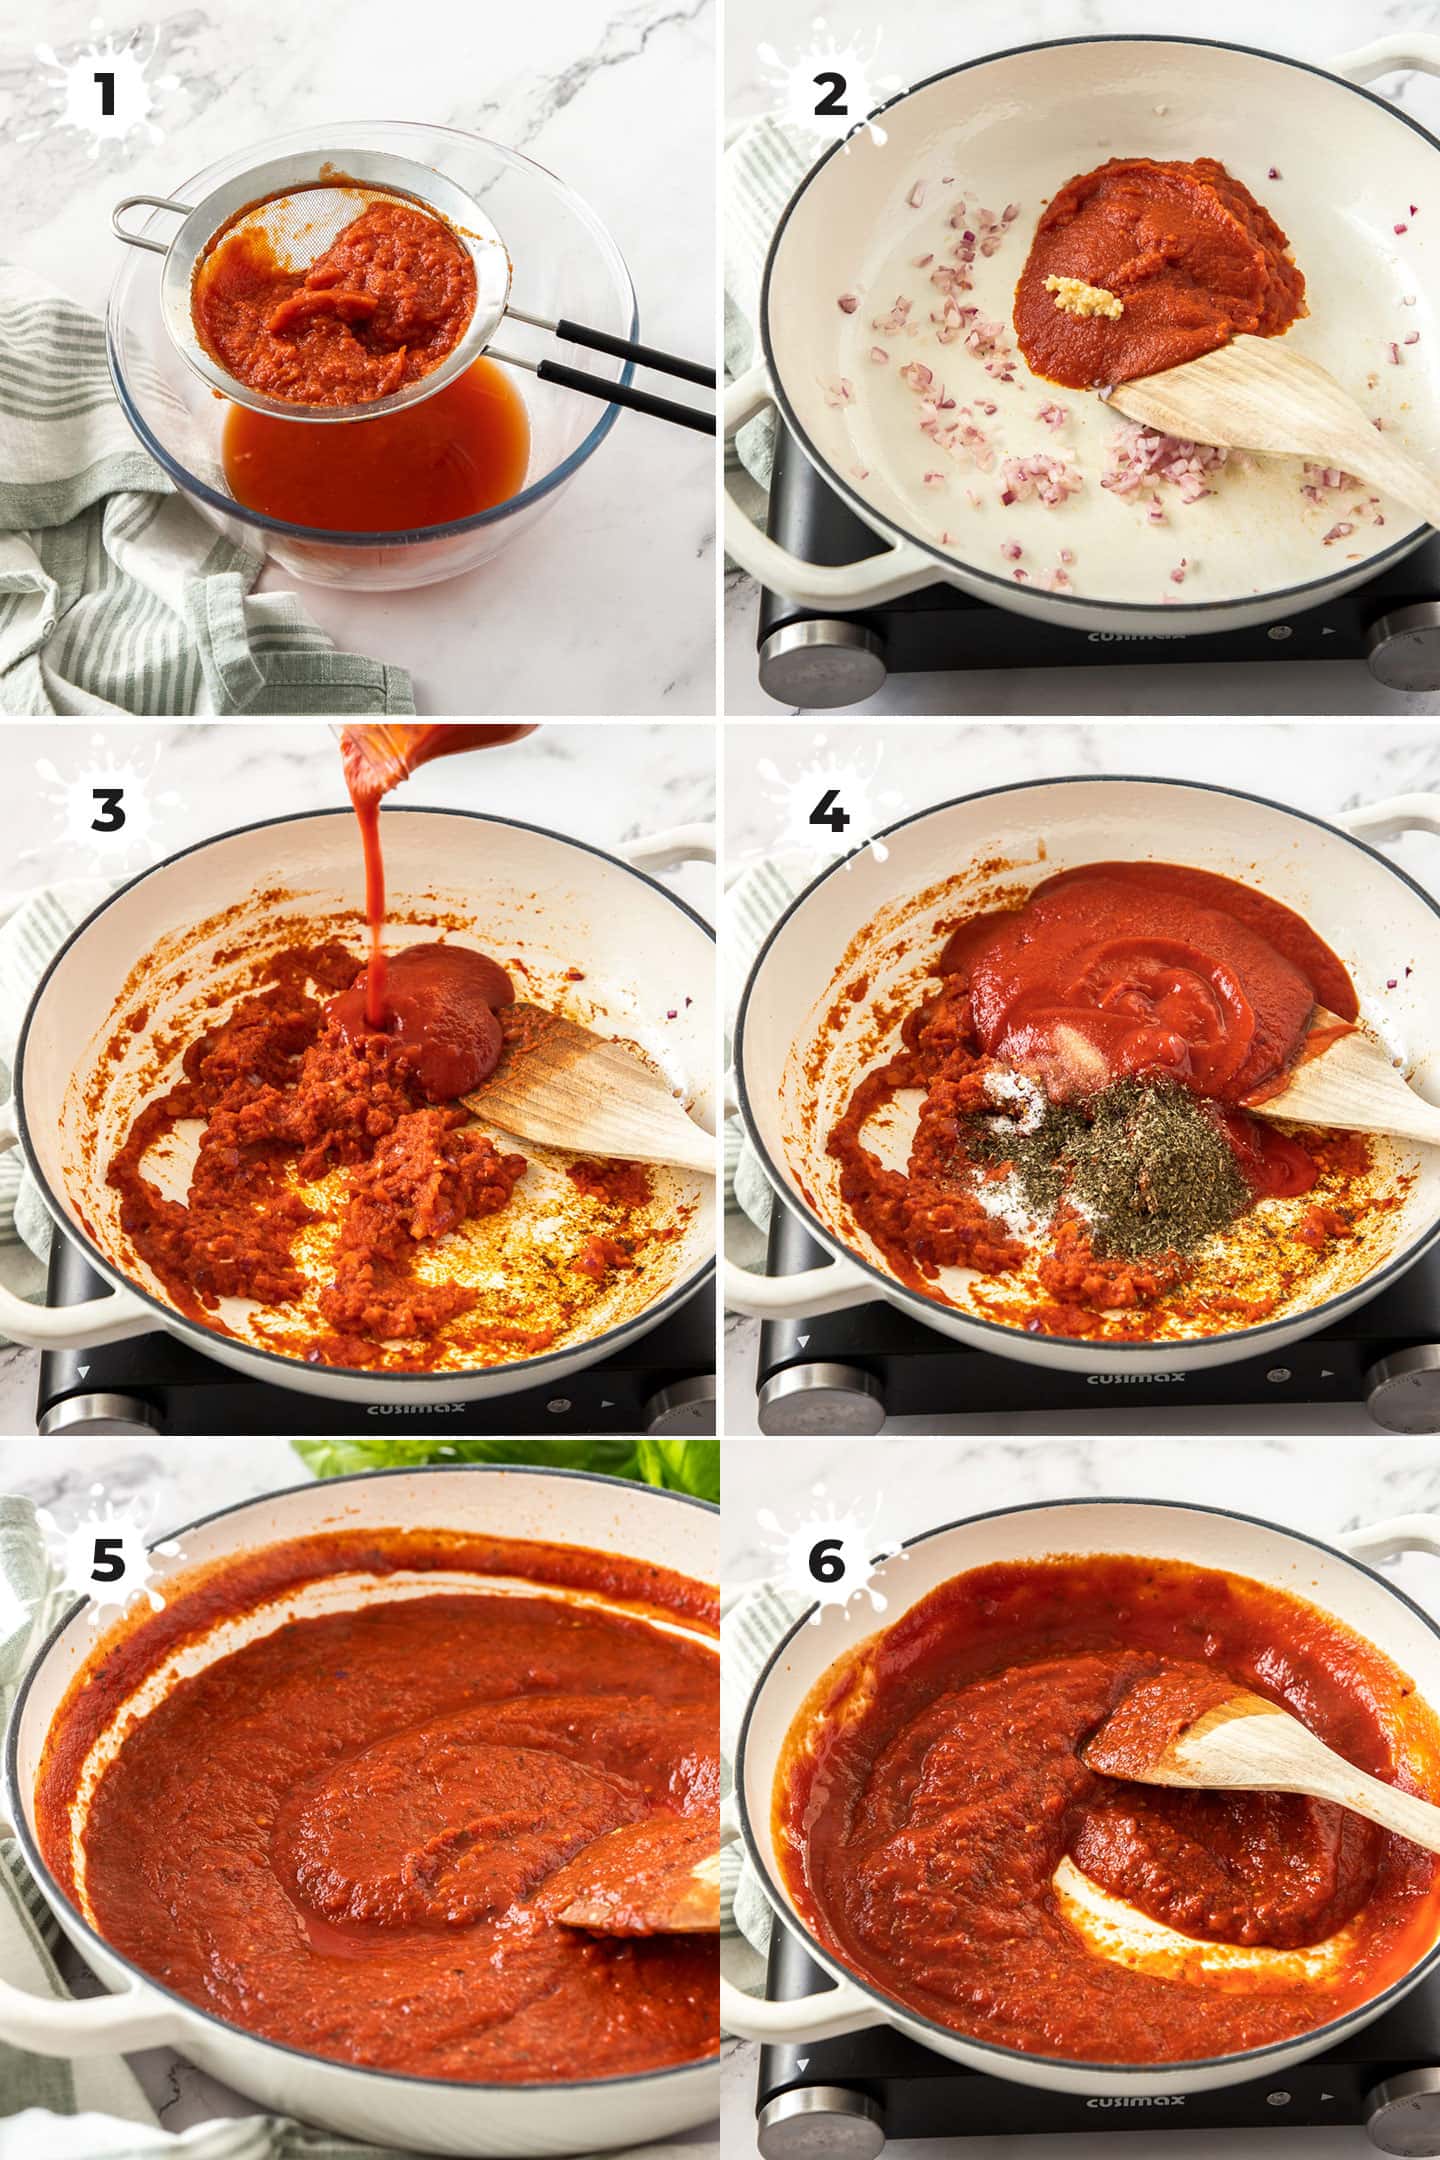 6 images showing how to make easy pasta sauce.